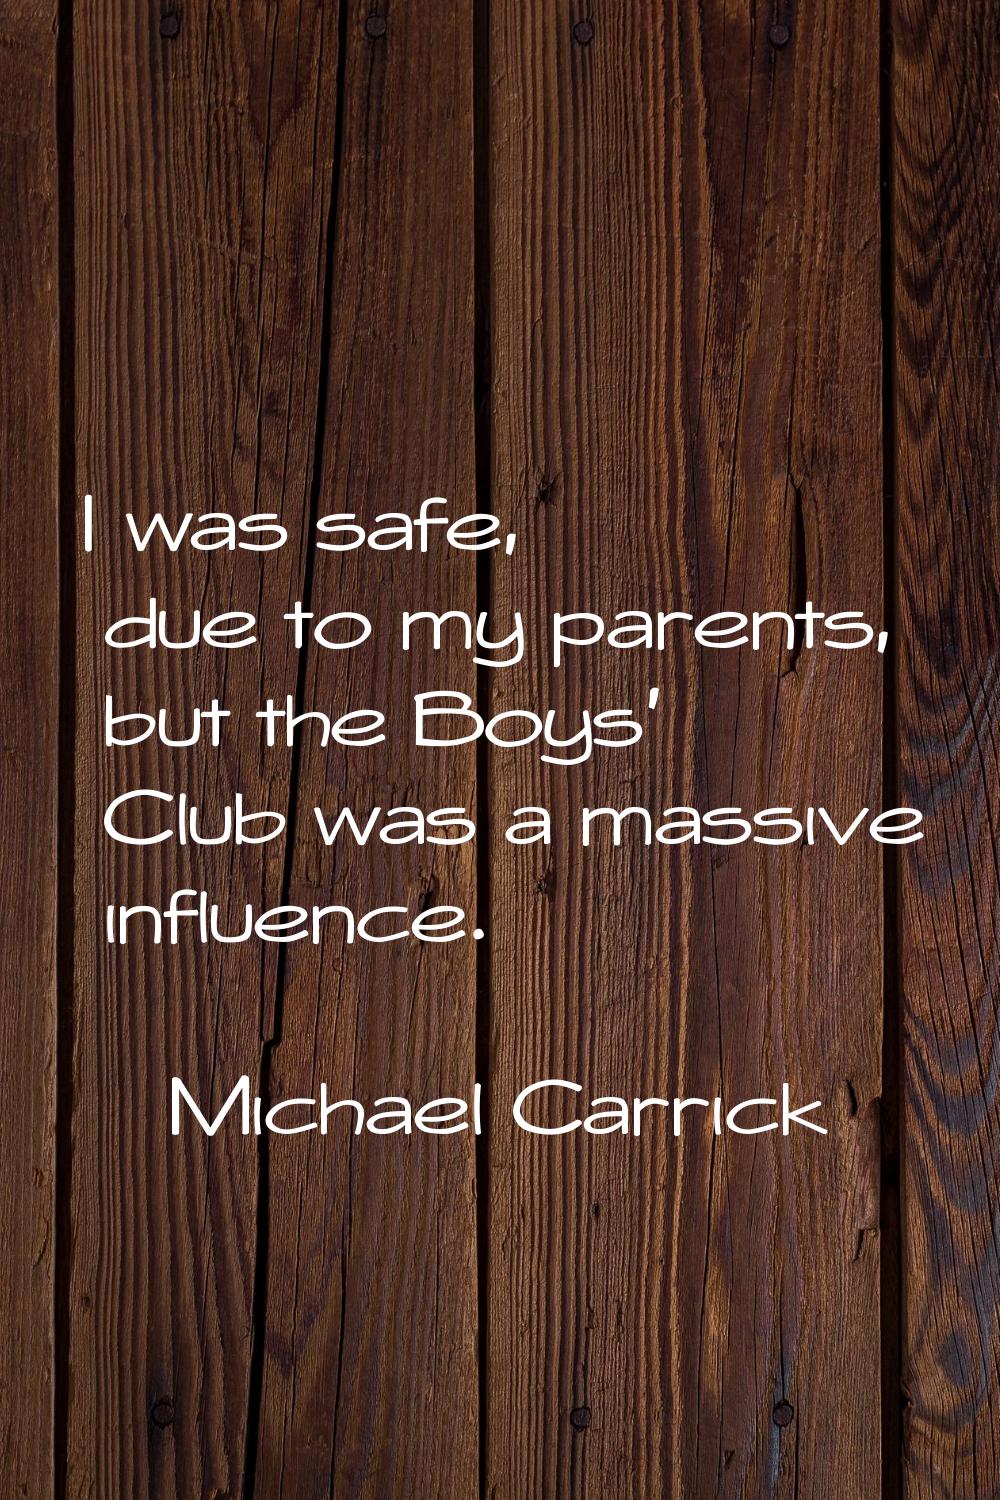 I was safe, due to my parents, but the Boys' Club was a massive influence.